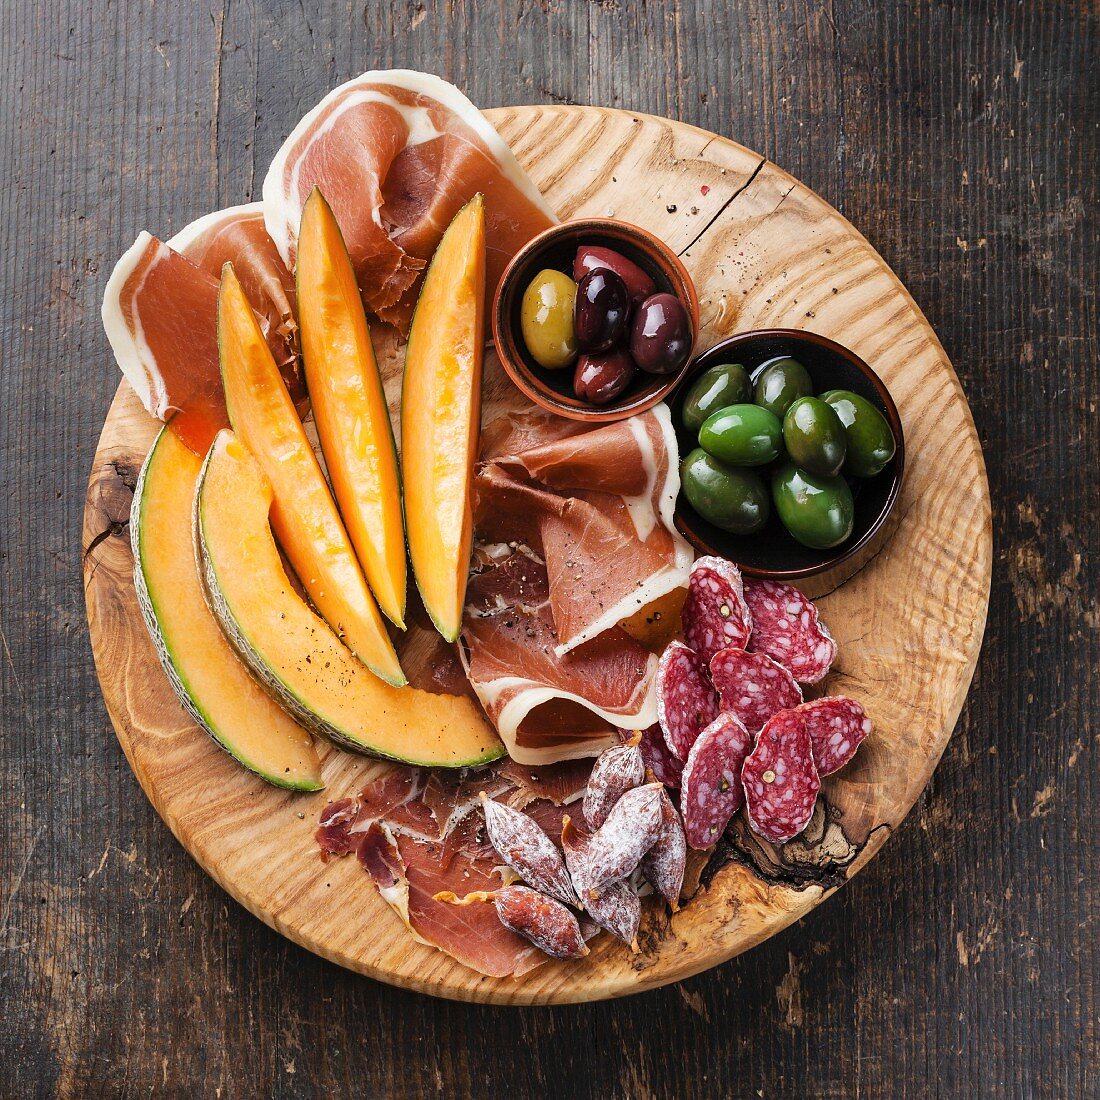 Antipasto ham, melon and olives on wooden background